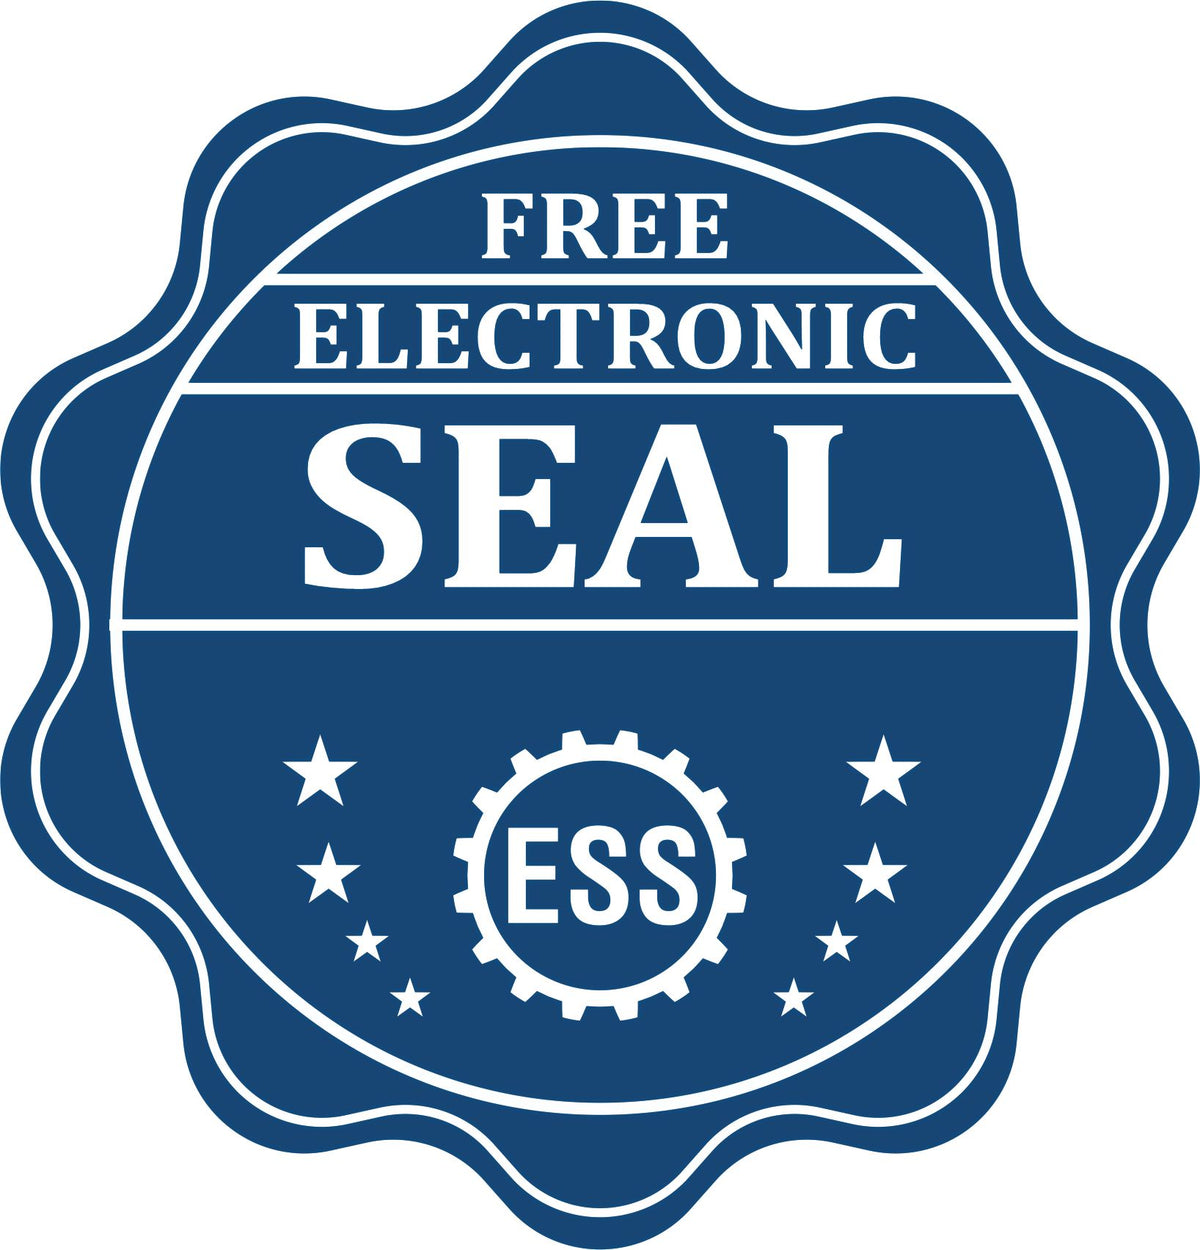 A badge showing a free electronic seal for the Hybrid Alaska Engineer Seal with stars and the ESS gear on the emblem.